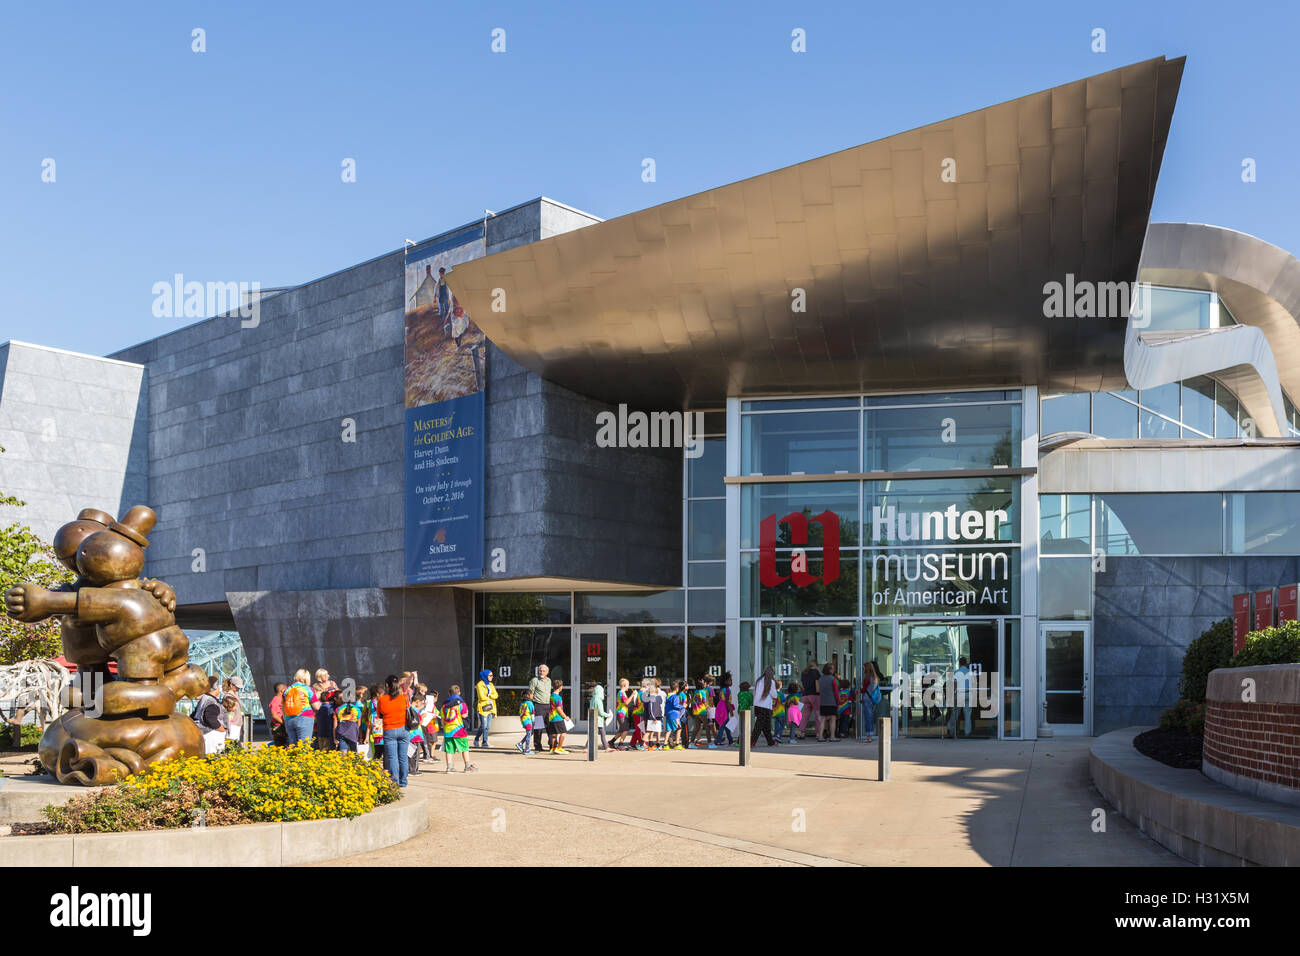 A group of elementary school students on a school field trip enters the Hunter Museum of American Art in Chattanooga, Tennessee. Stock Photo